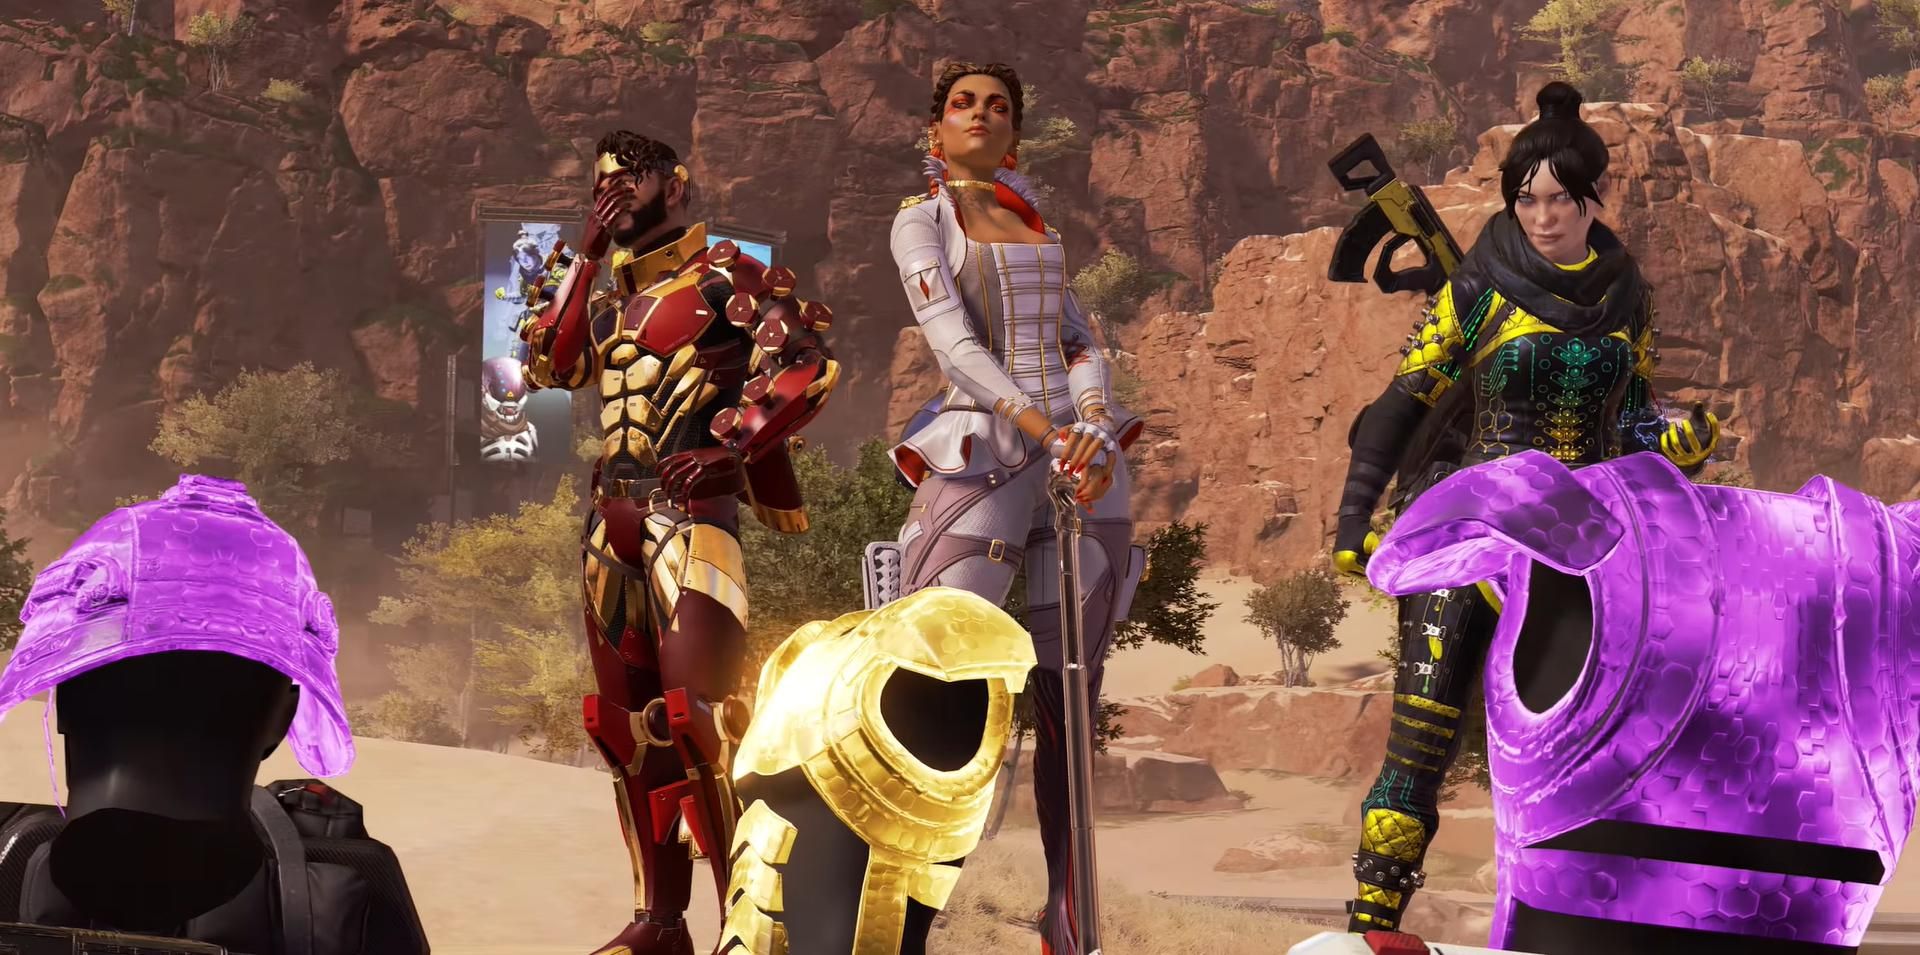 Apex legends characters standing around near armor